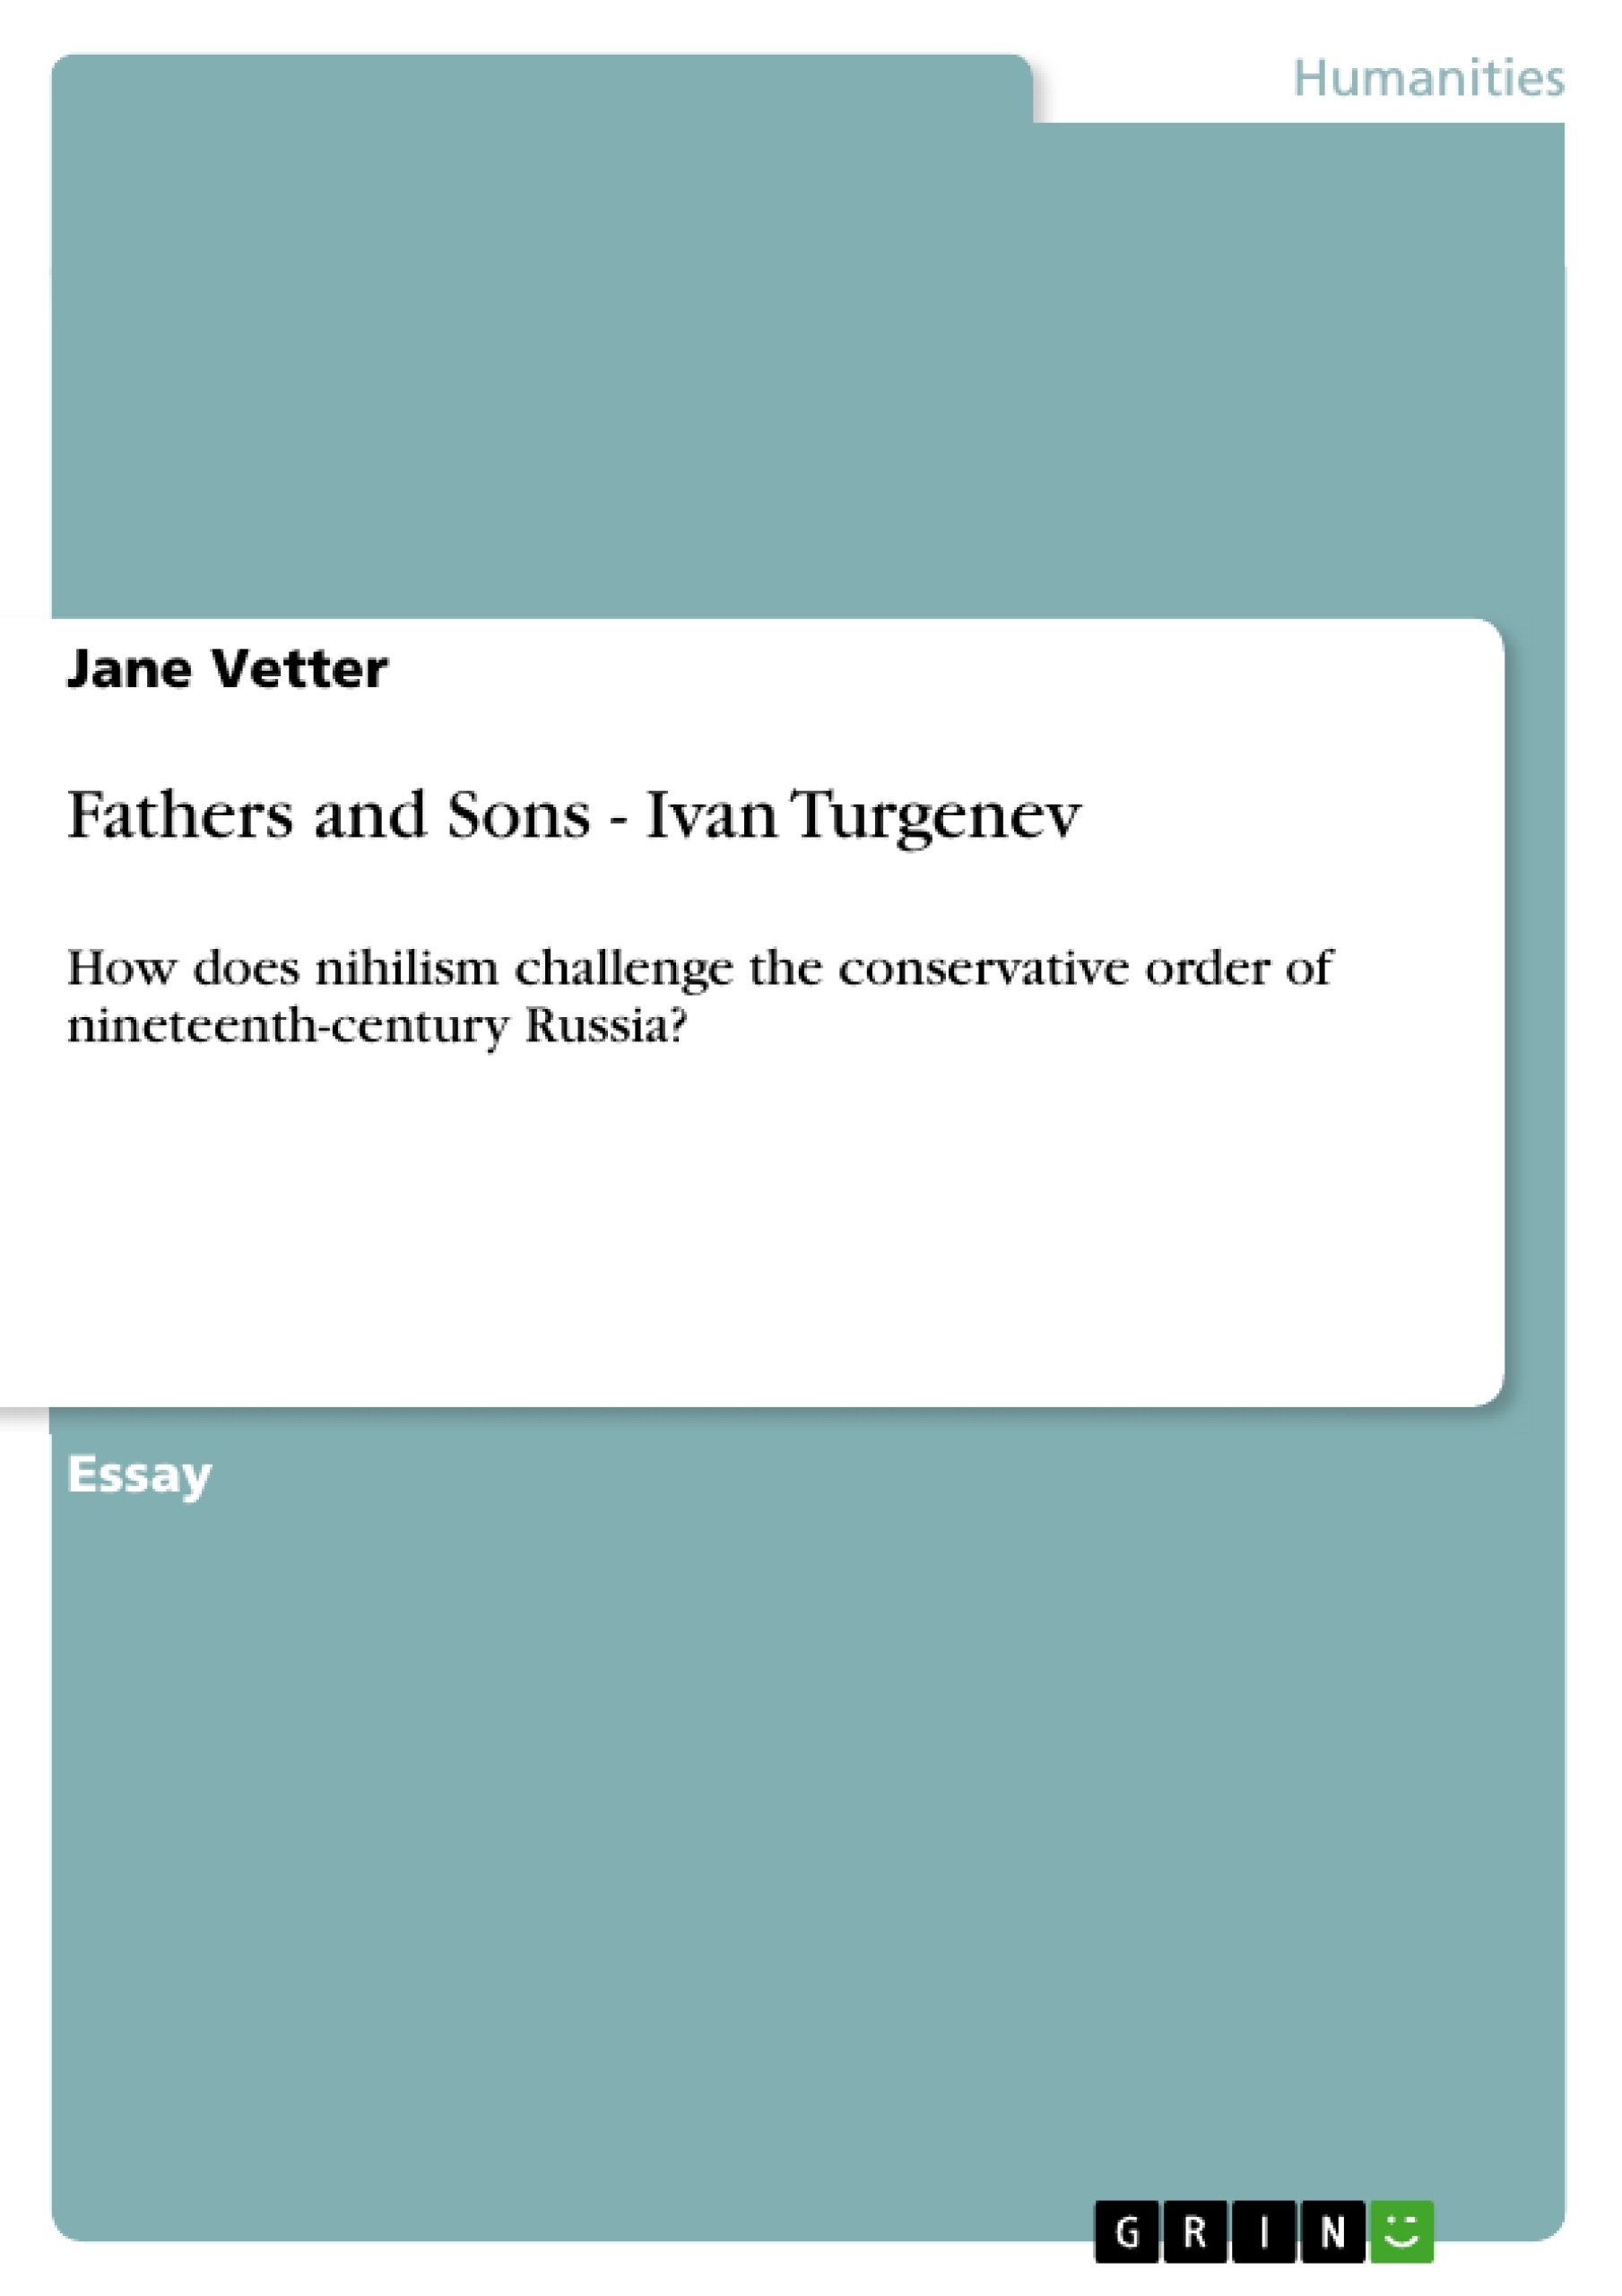 Title: Fathers and Sons - Ivan Turgenev